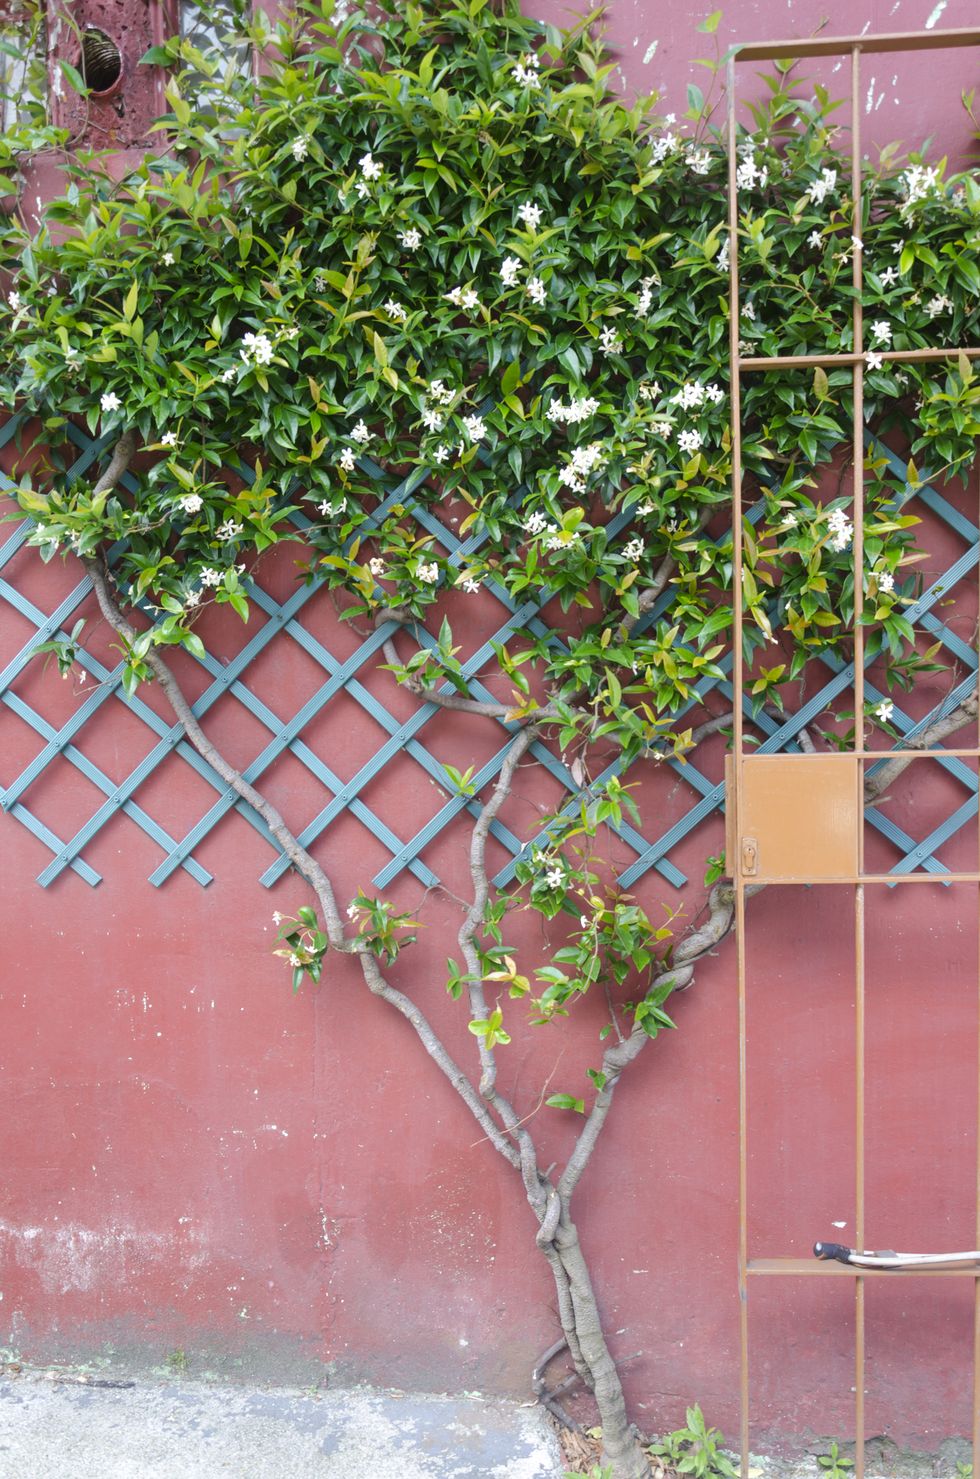 A trellis with star jasmine flowers (trachelospermum jasminoides) growing on the outside wall